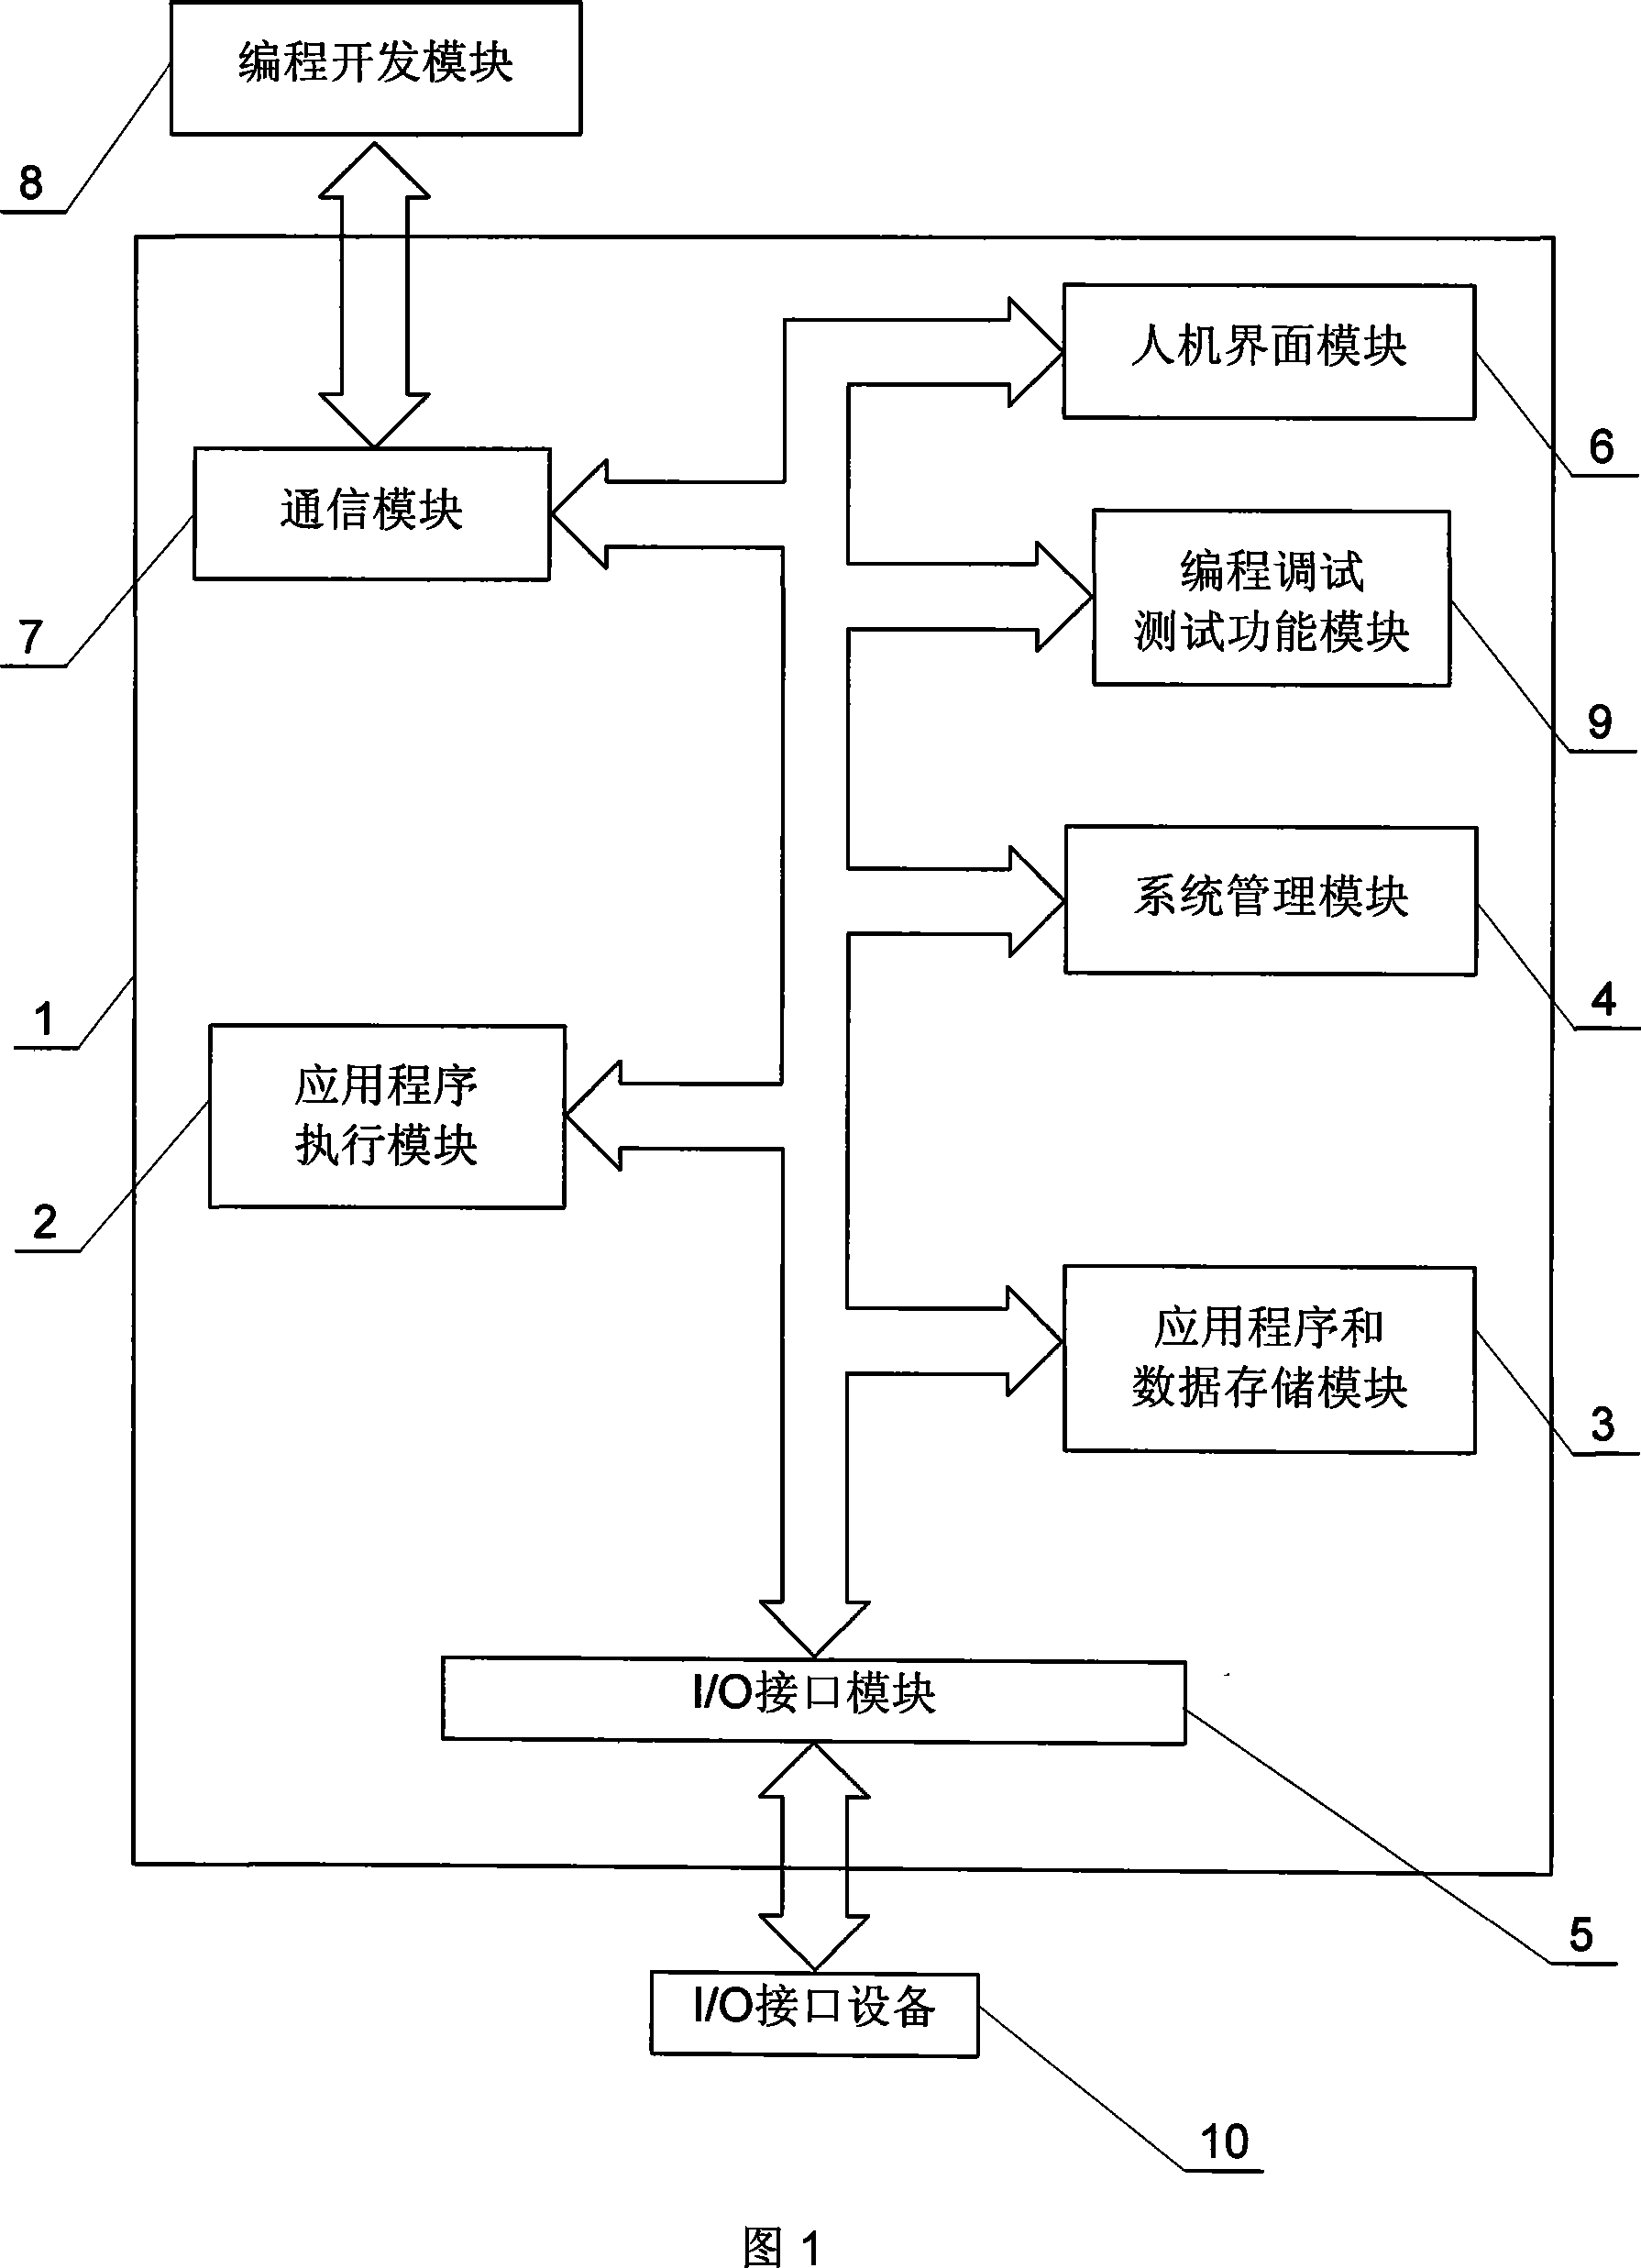 Soft PLC module of open type soft numerical control system